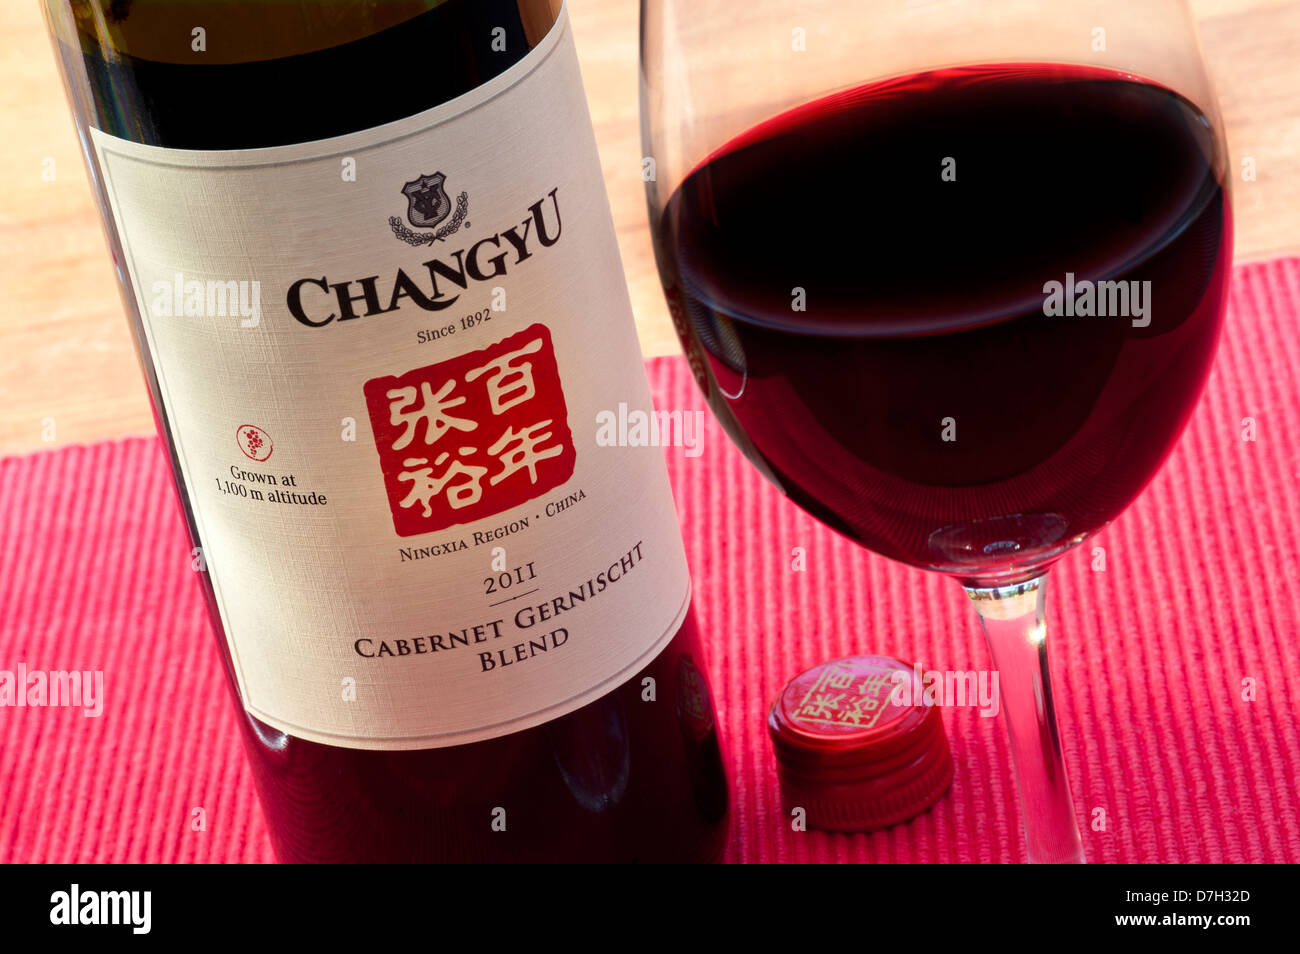 Bottle and glass of 2011 Chinese 'Changyu' Cabernet Gernischt red wine from Ningxia region of China Stock Photo